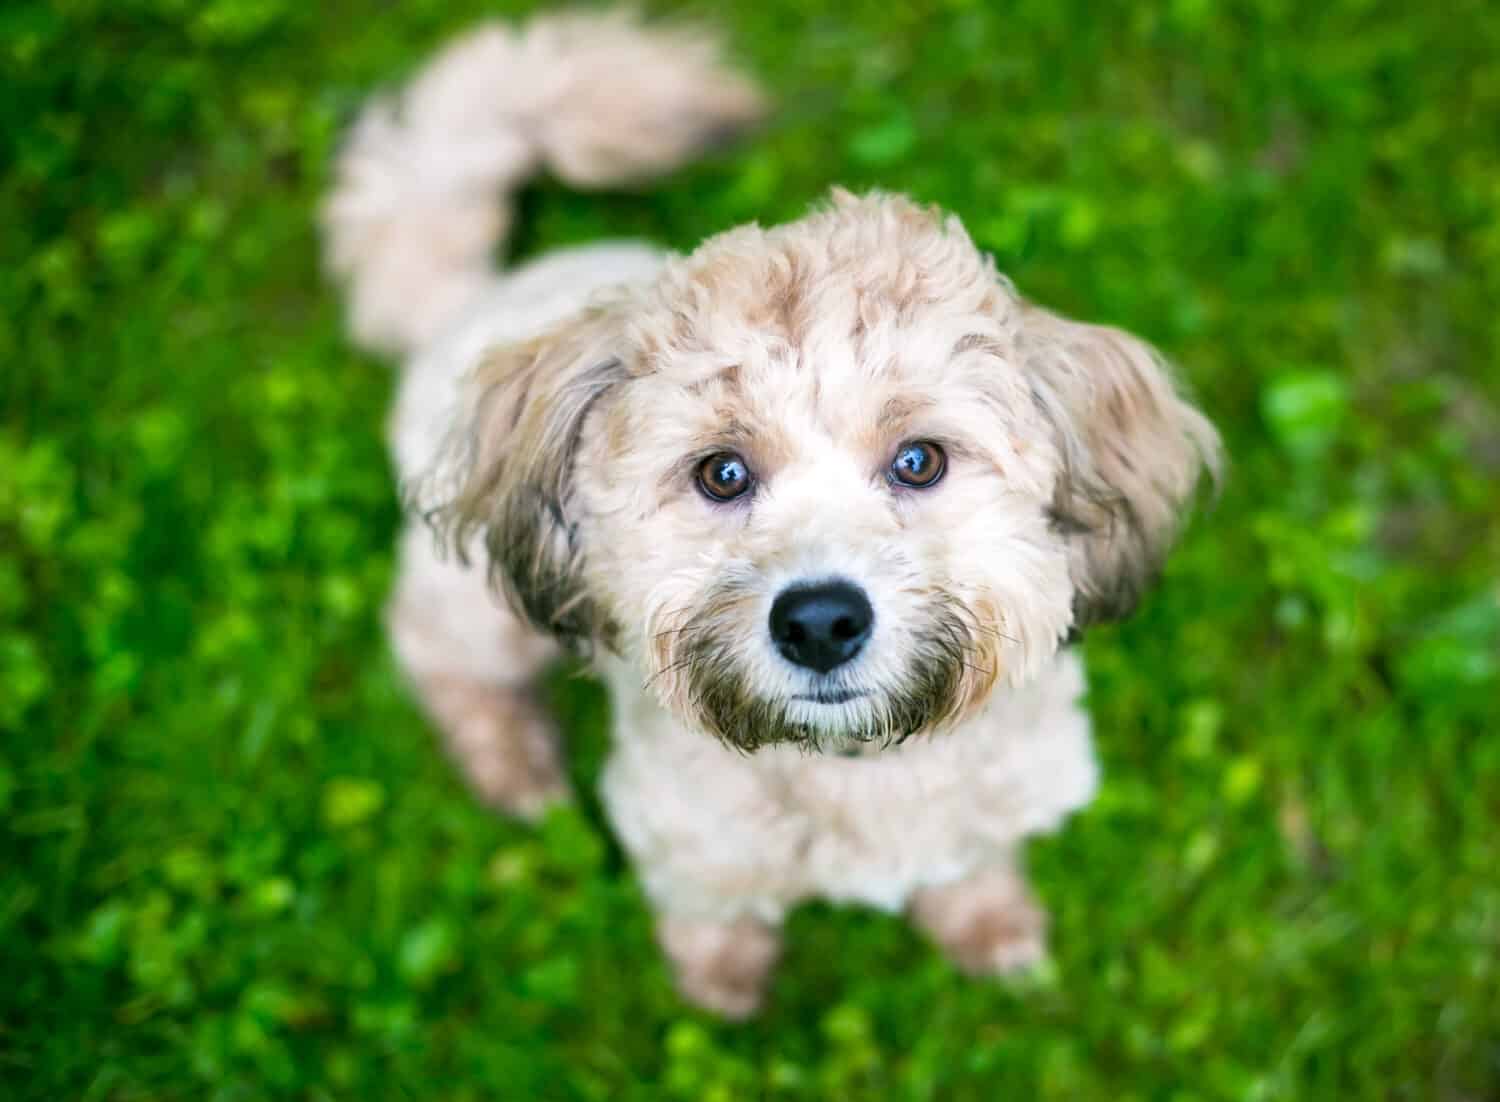 A small Poodle mixed breed dog sitting and looking up at the camera